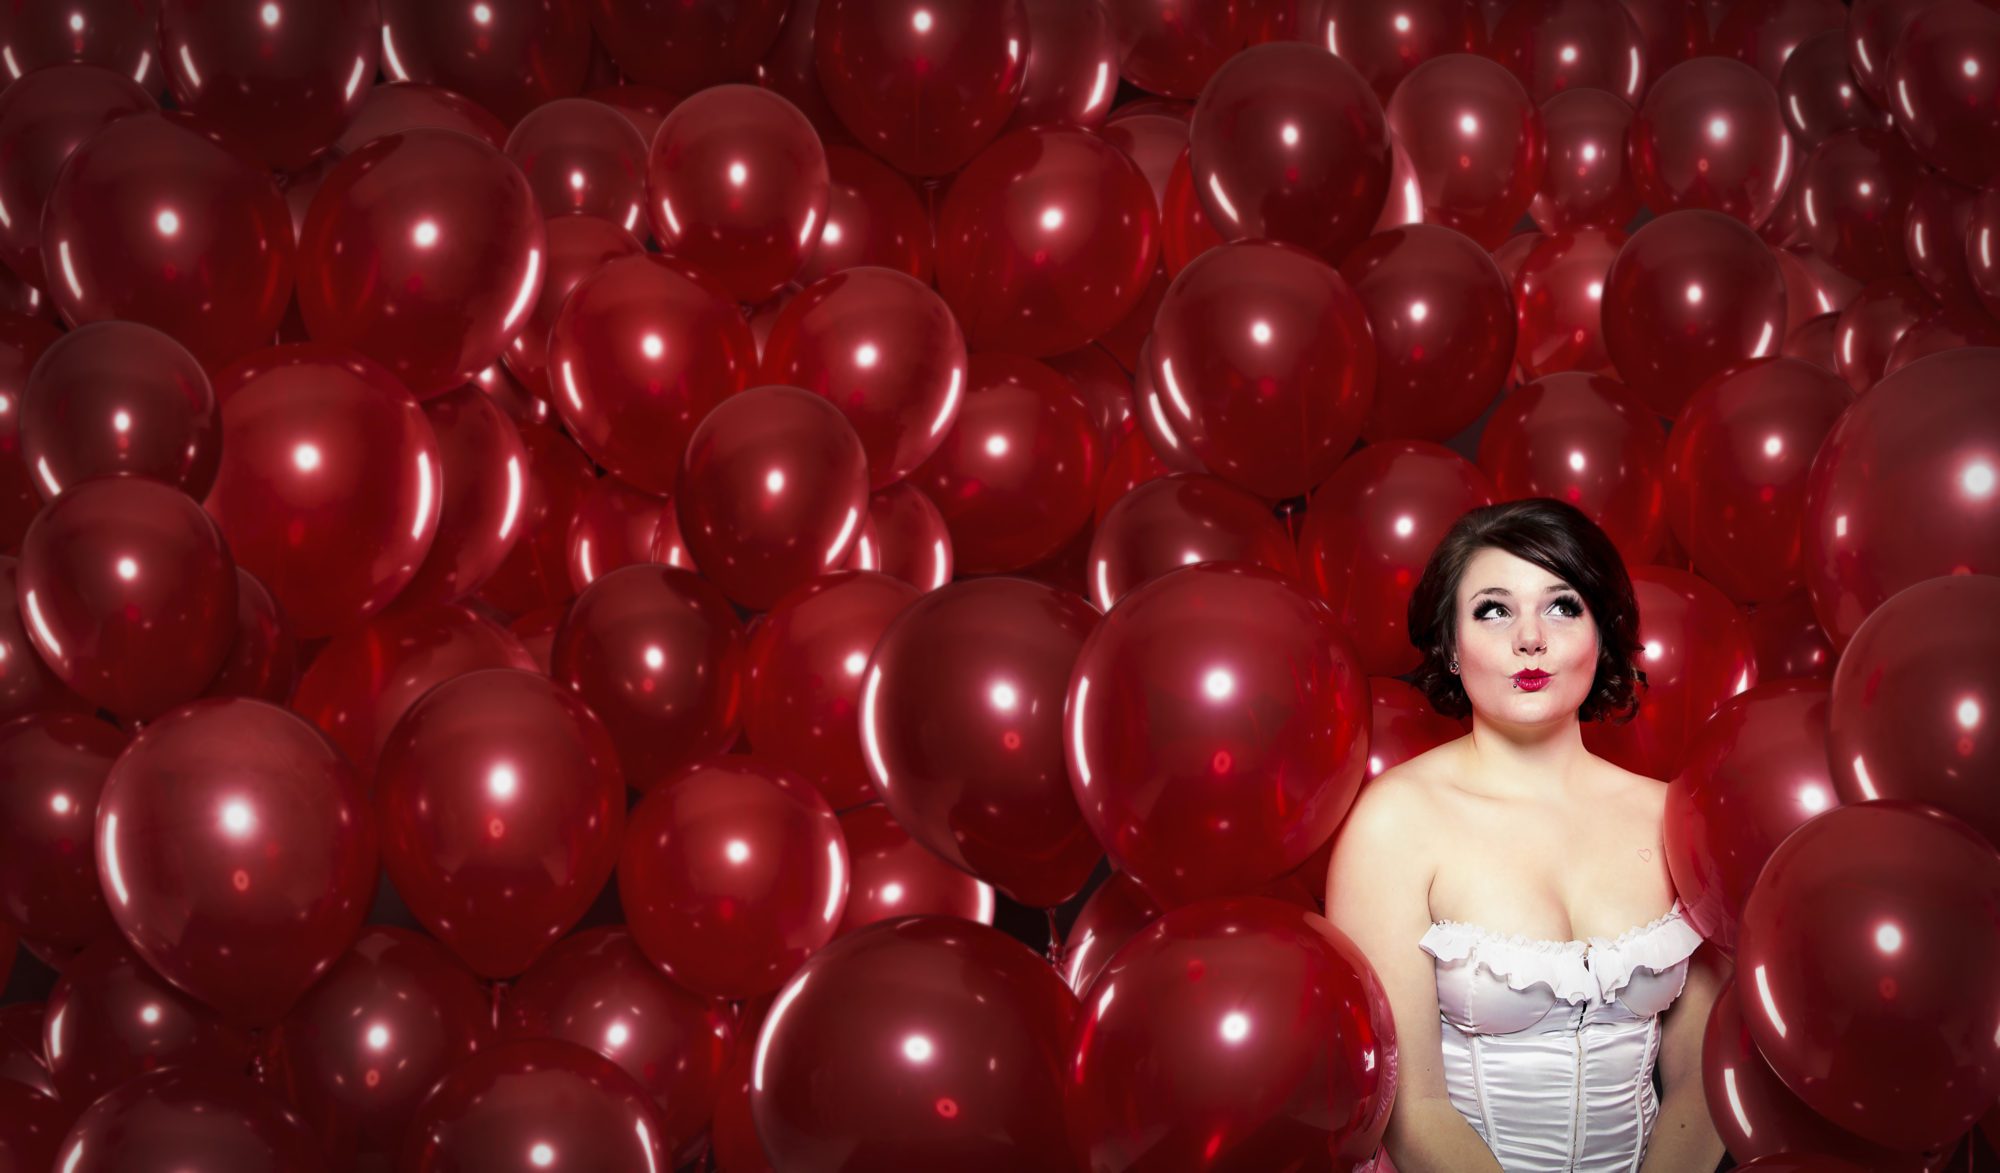 10. Surrounded By Balloons